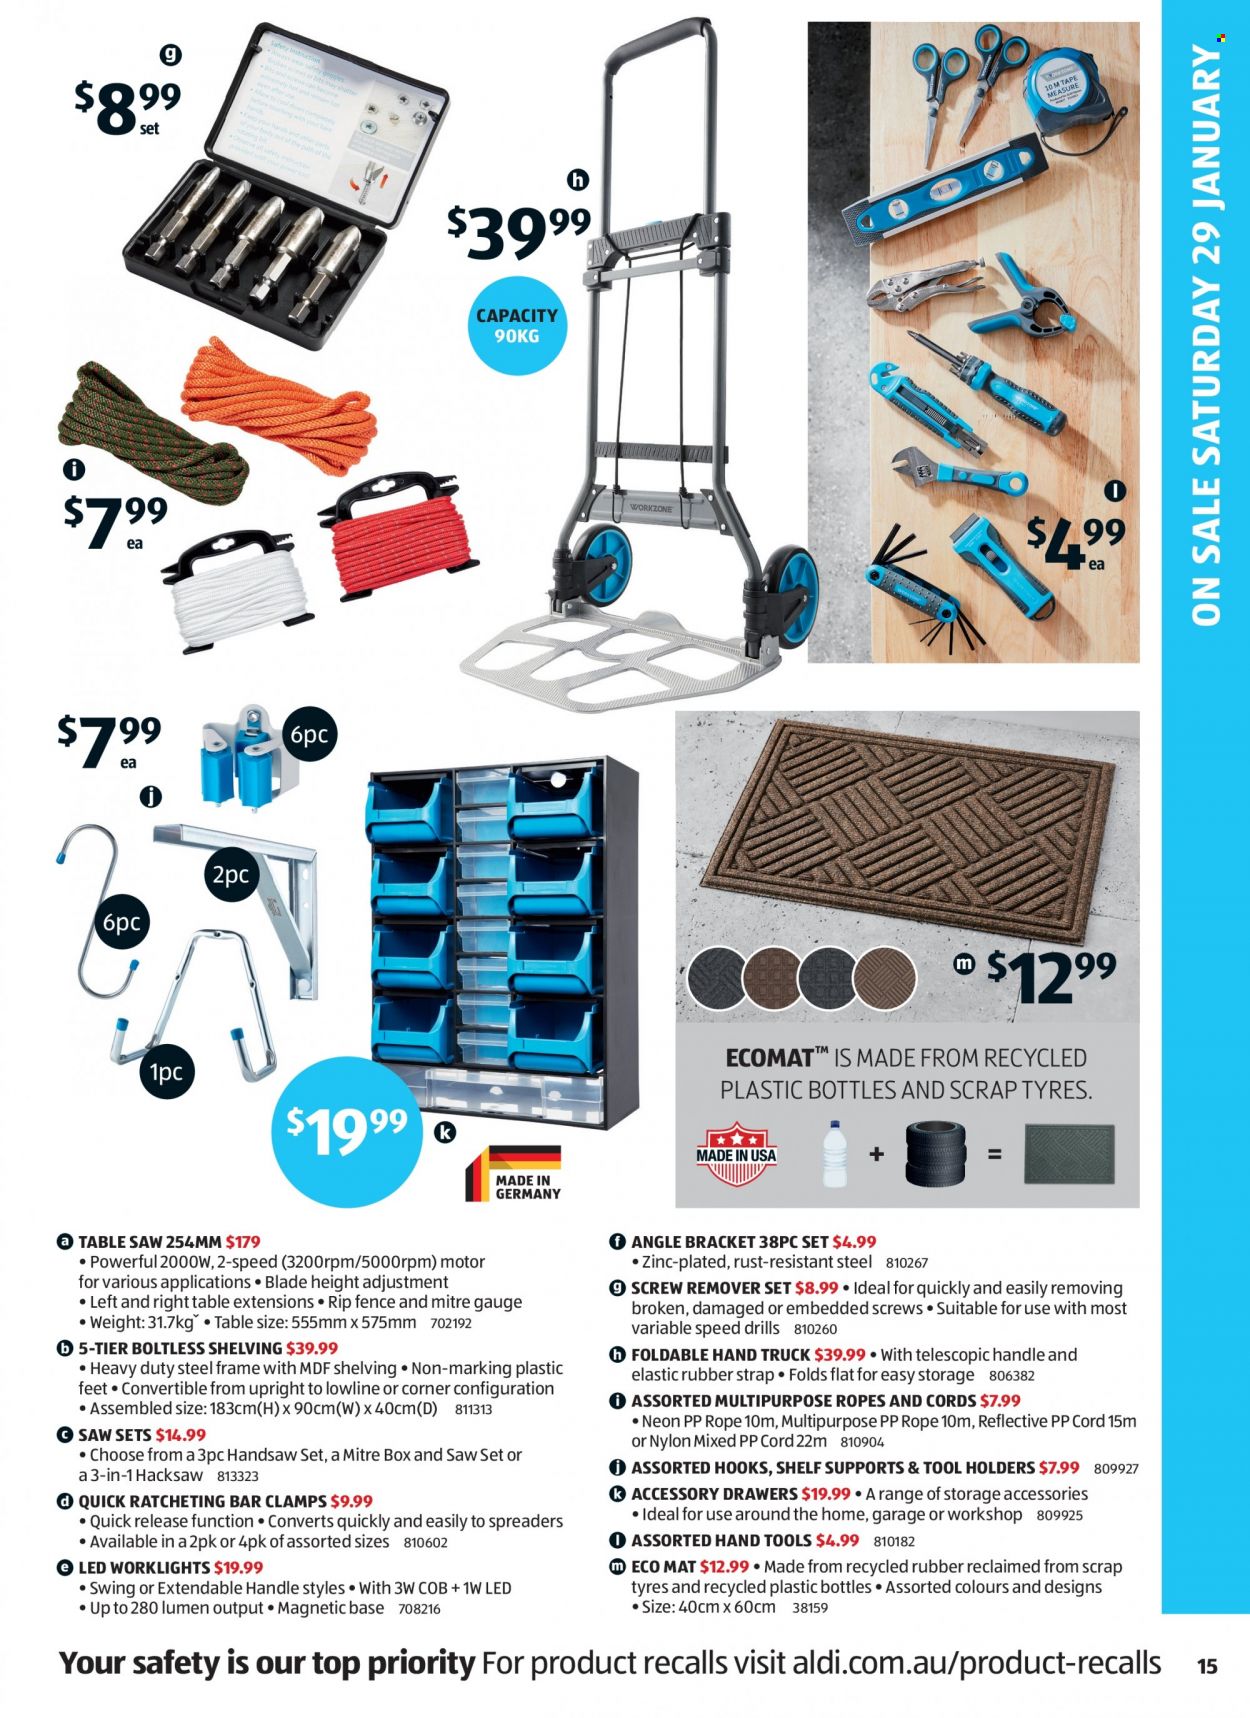 thumbnail - ALDI Catalogue - 26 Jan 2022 - 1 Feb 2022 - Sales products - hook, eraser, table, saw, hacksaw, table saw, handsaw, hand tools, hand truck, strap, tires, zinc. Page 15.